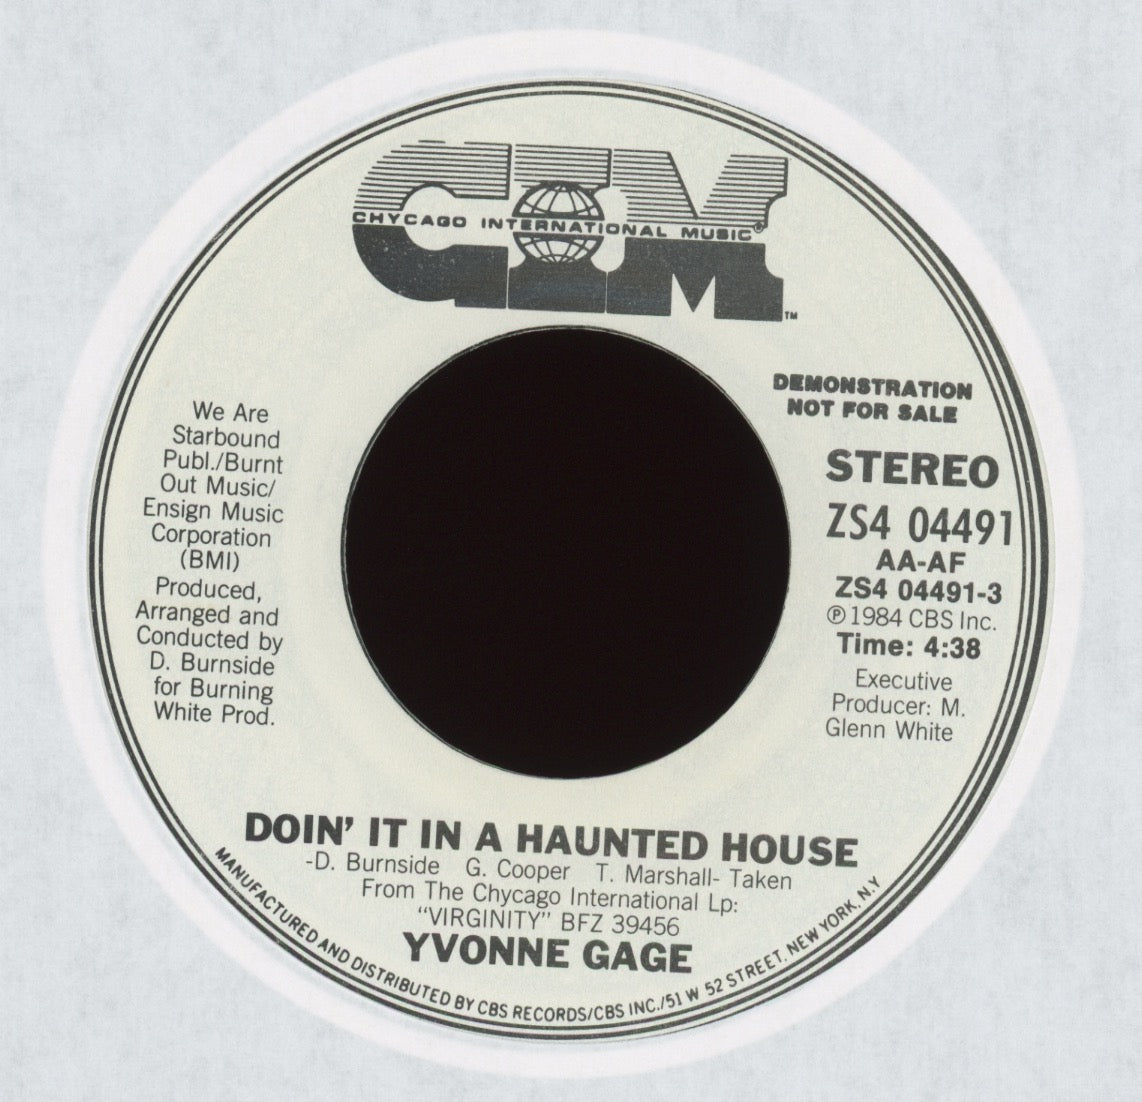 Yvonne Gage - Doin' It In A Haunted House on CIM Promo